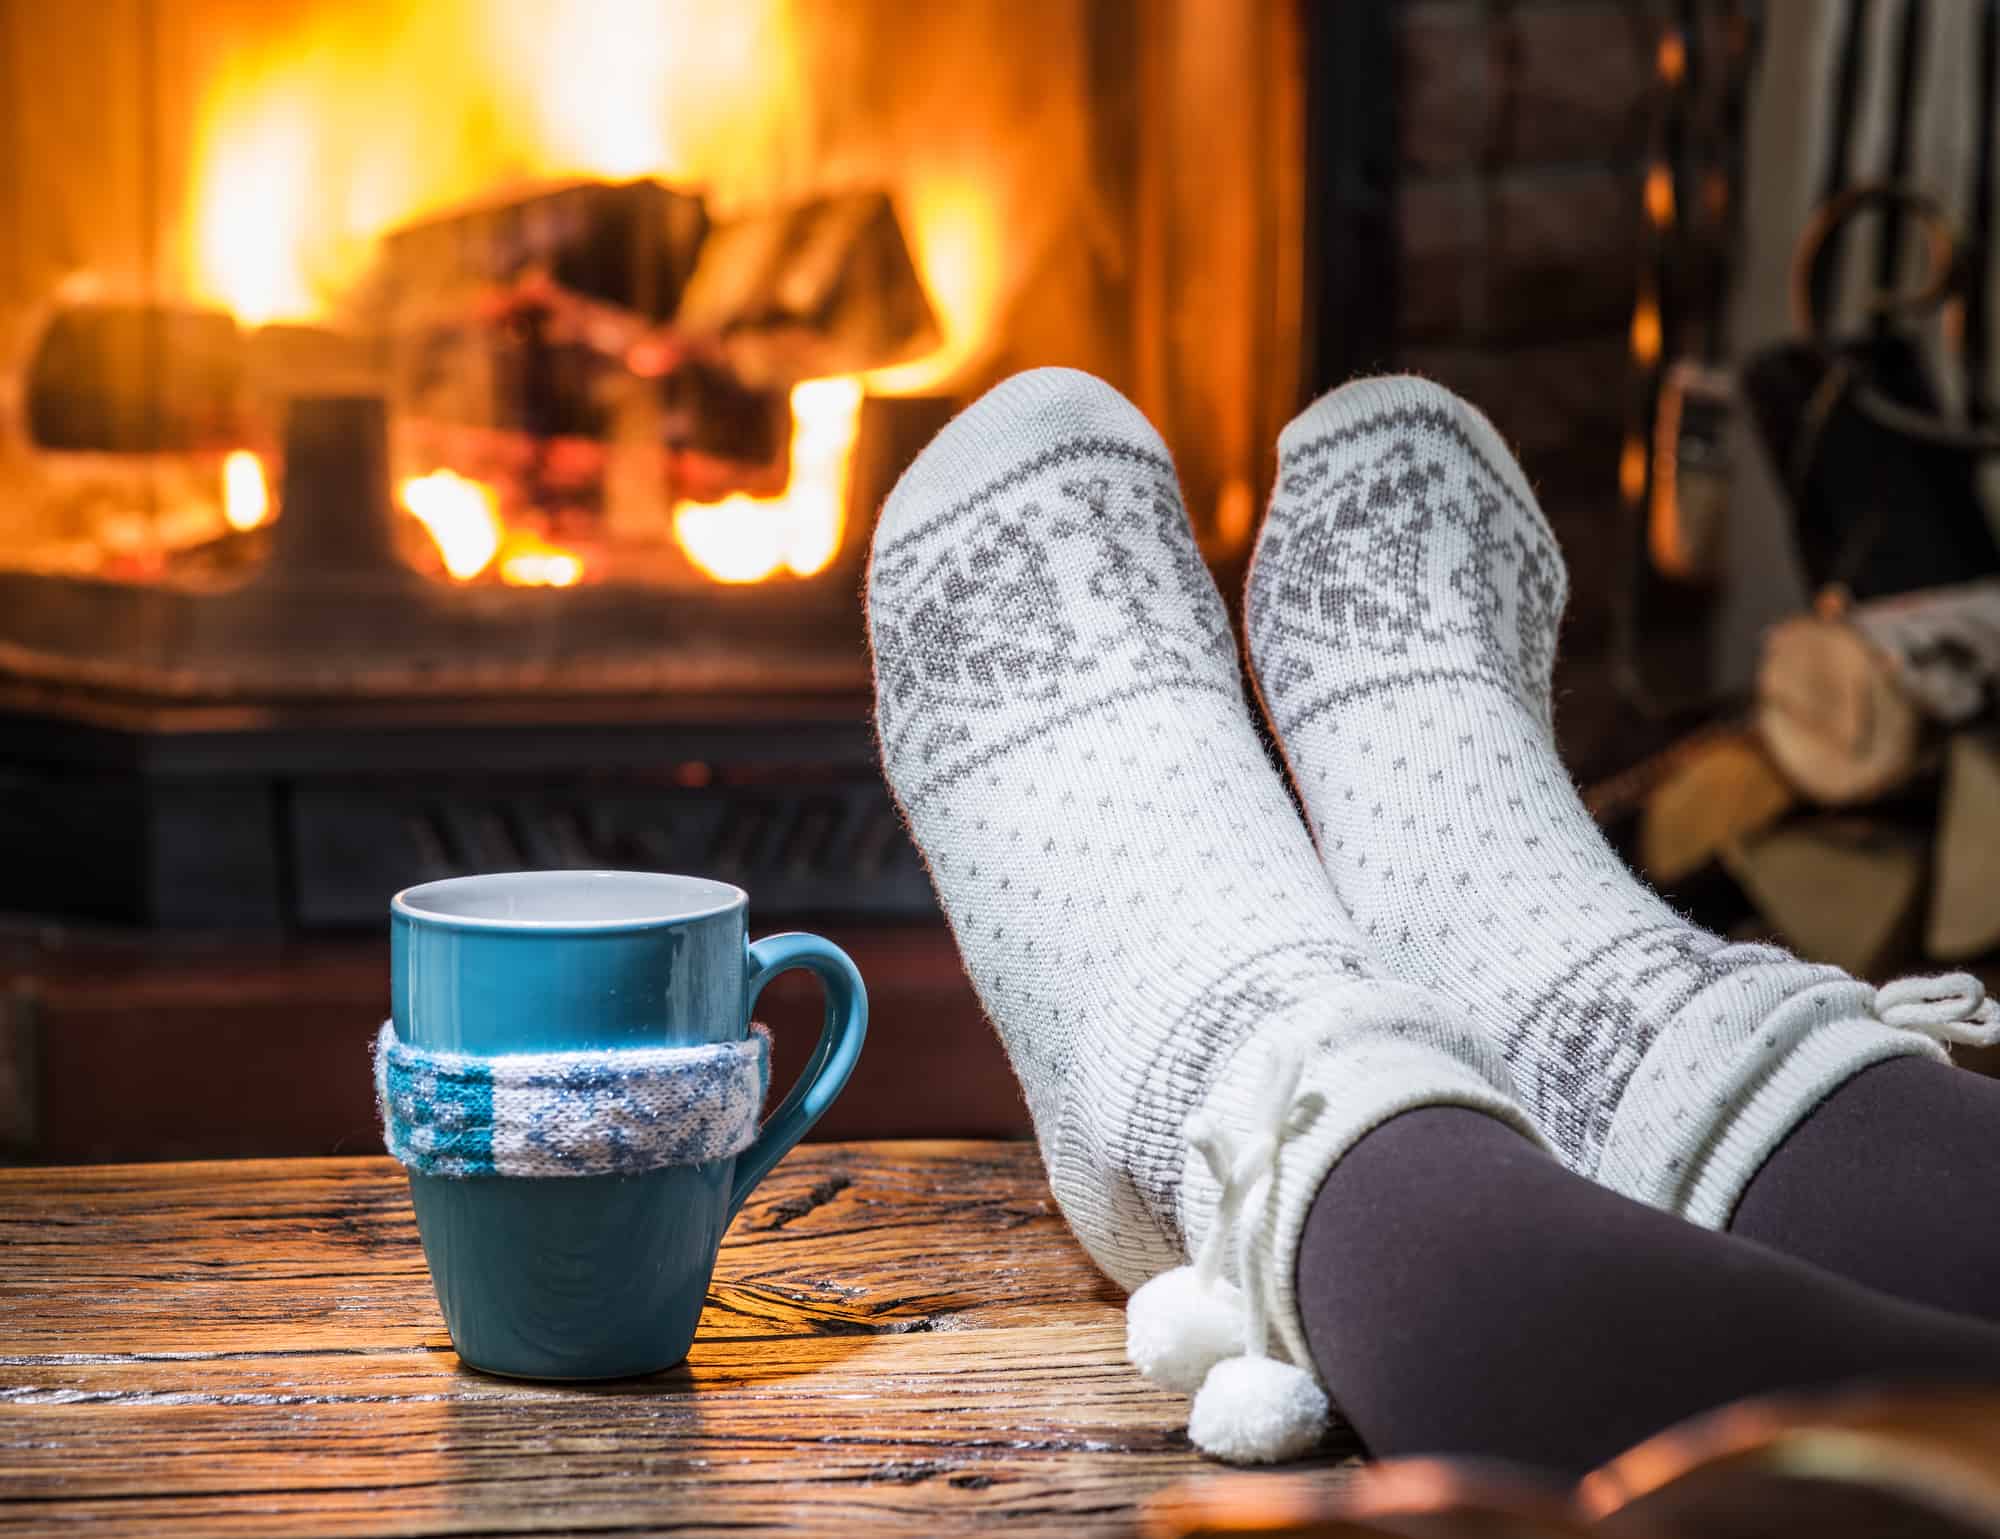 Relaxing with a hot drink by the fire is a great way to practice self care during the holiday! For more helpful tips and delicious recipes, go to Made in a Pinch and follow us on Pinterest!